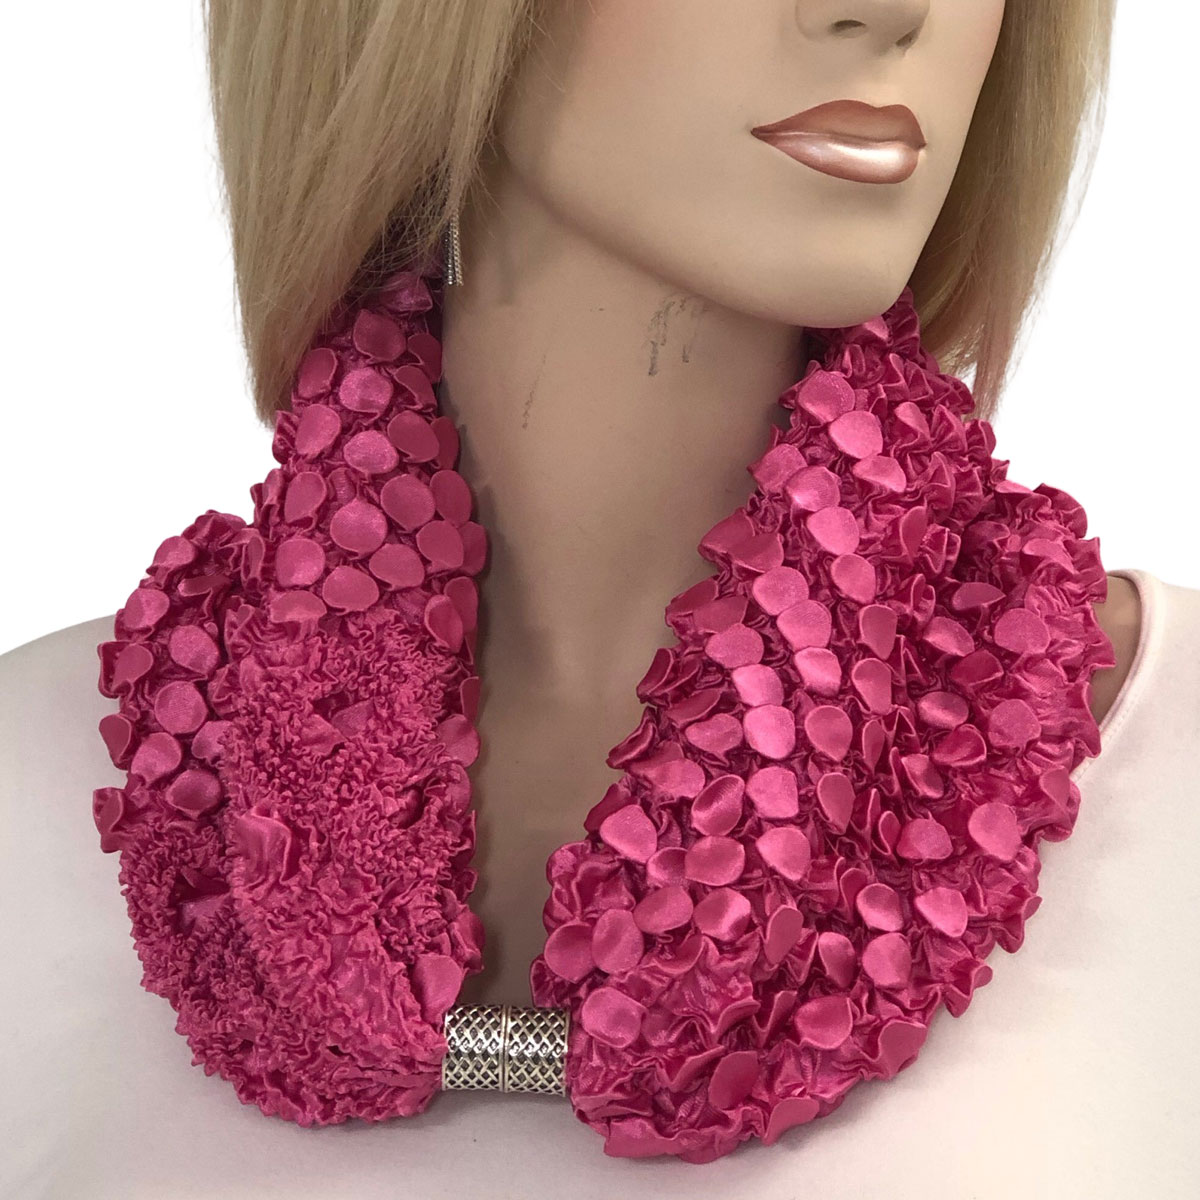 Magnetic Clasp Scarves - Coin + Bubble Satin 3302 #32 MAGENTA Magnetic Clasp Scarf -  Bubble Satin - 